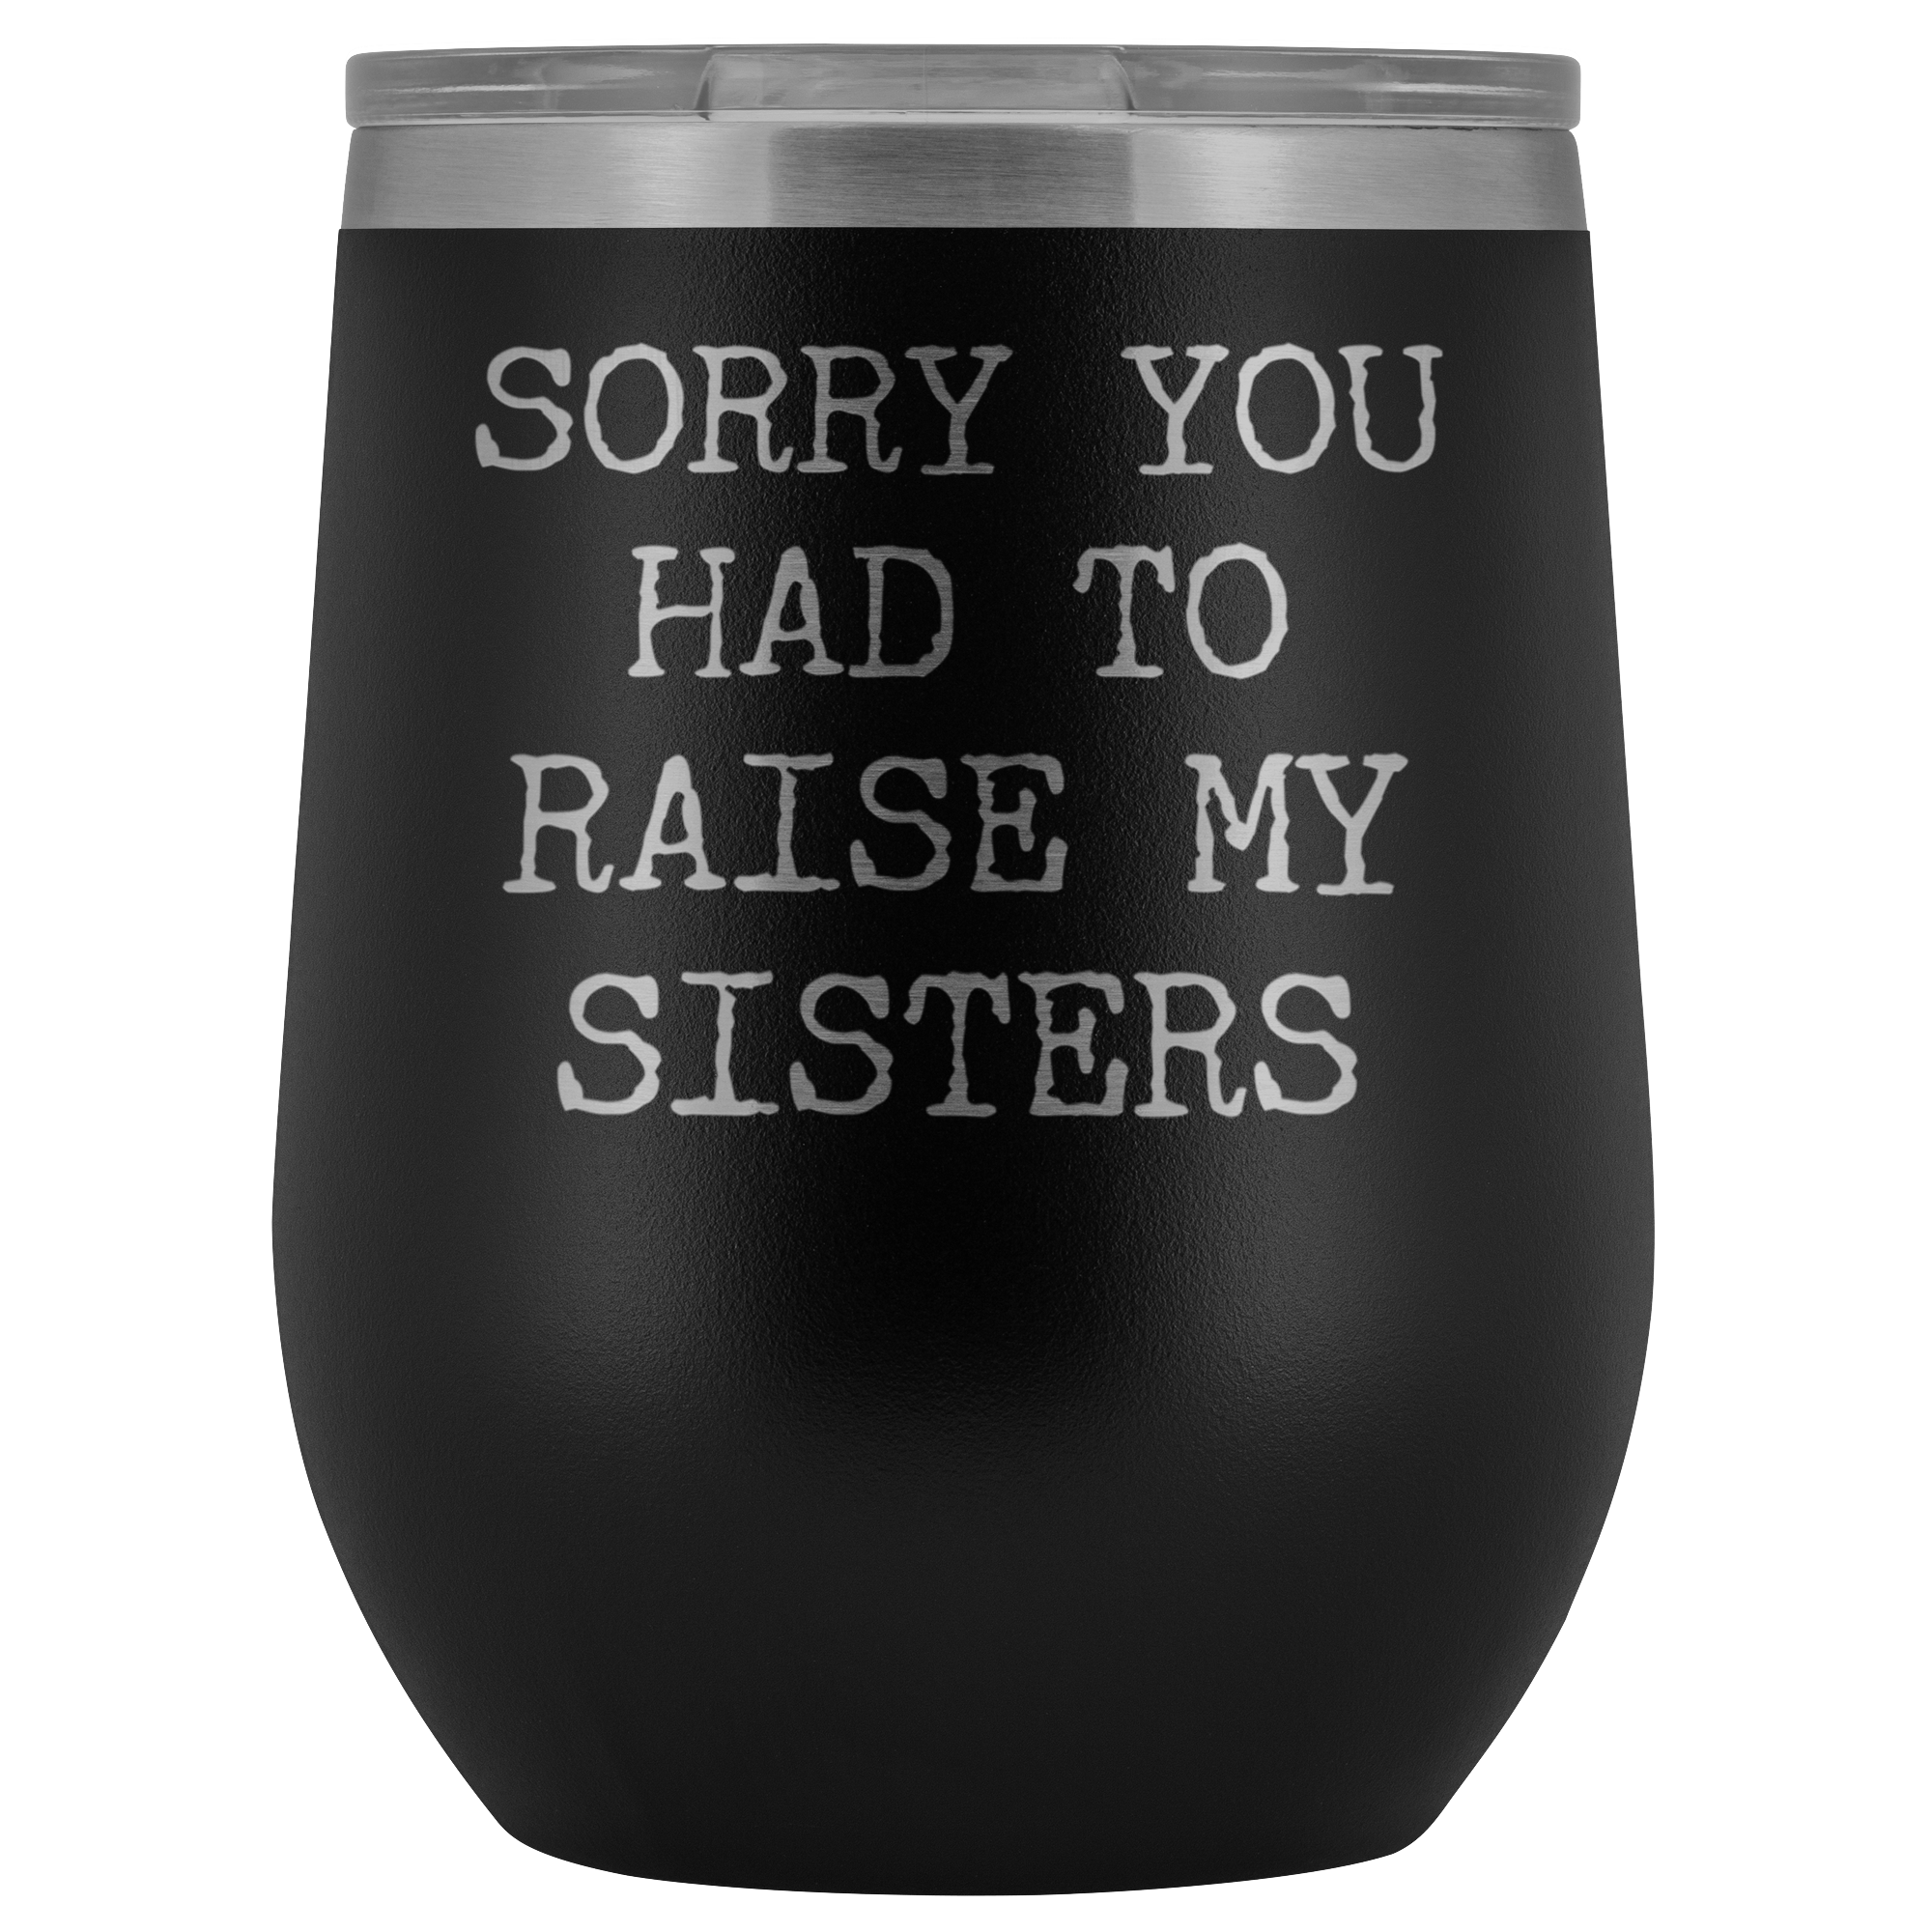 Funny Mother's Day Gift Sorry You Had to Raise My Sisters Stemless Stainless Steel Insulated Wine Tumbler Cup BPA Free 12oz